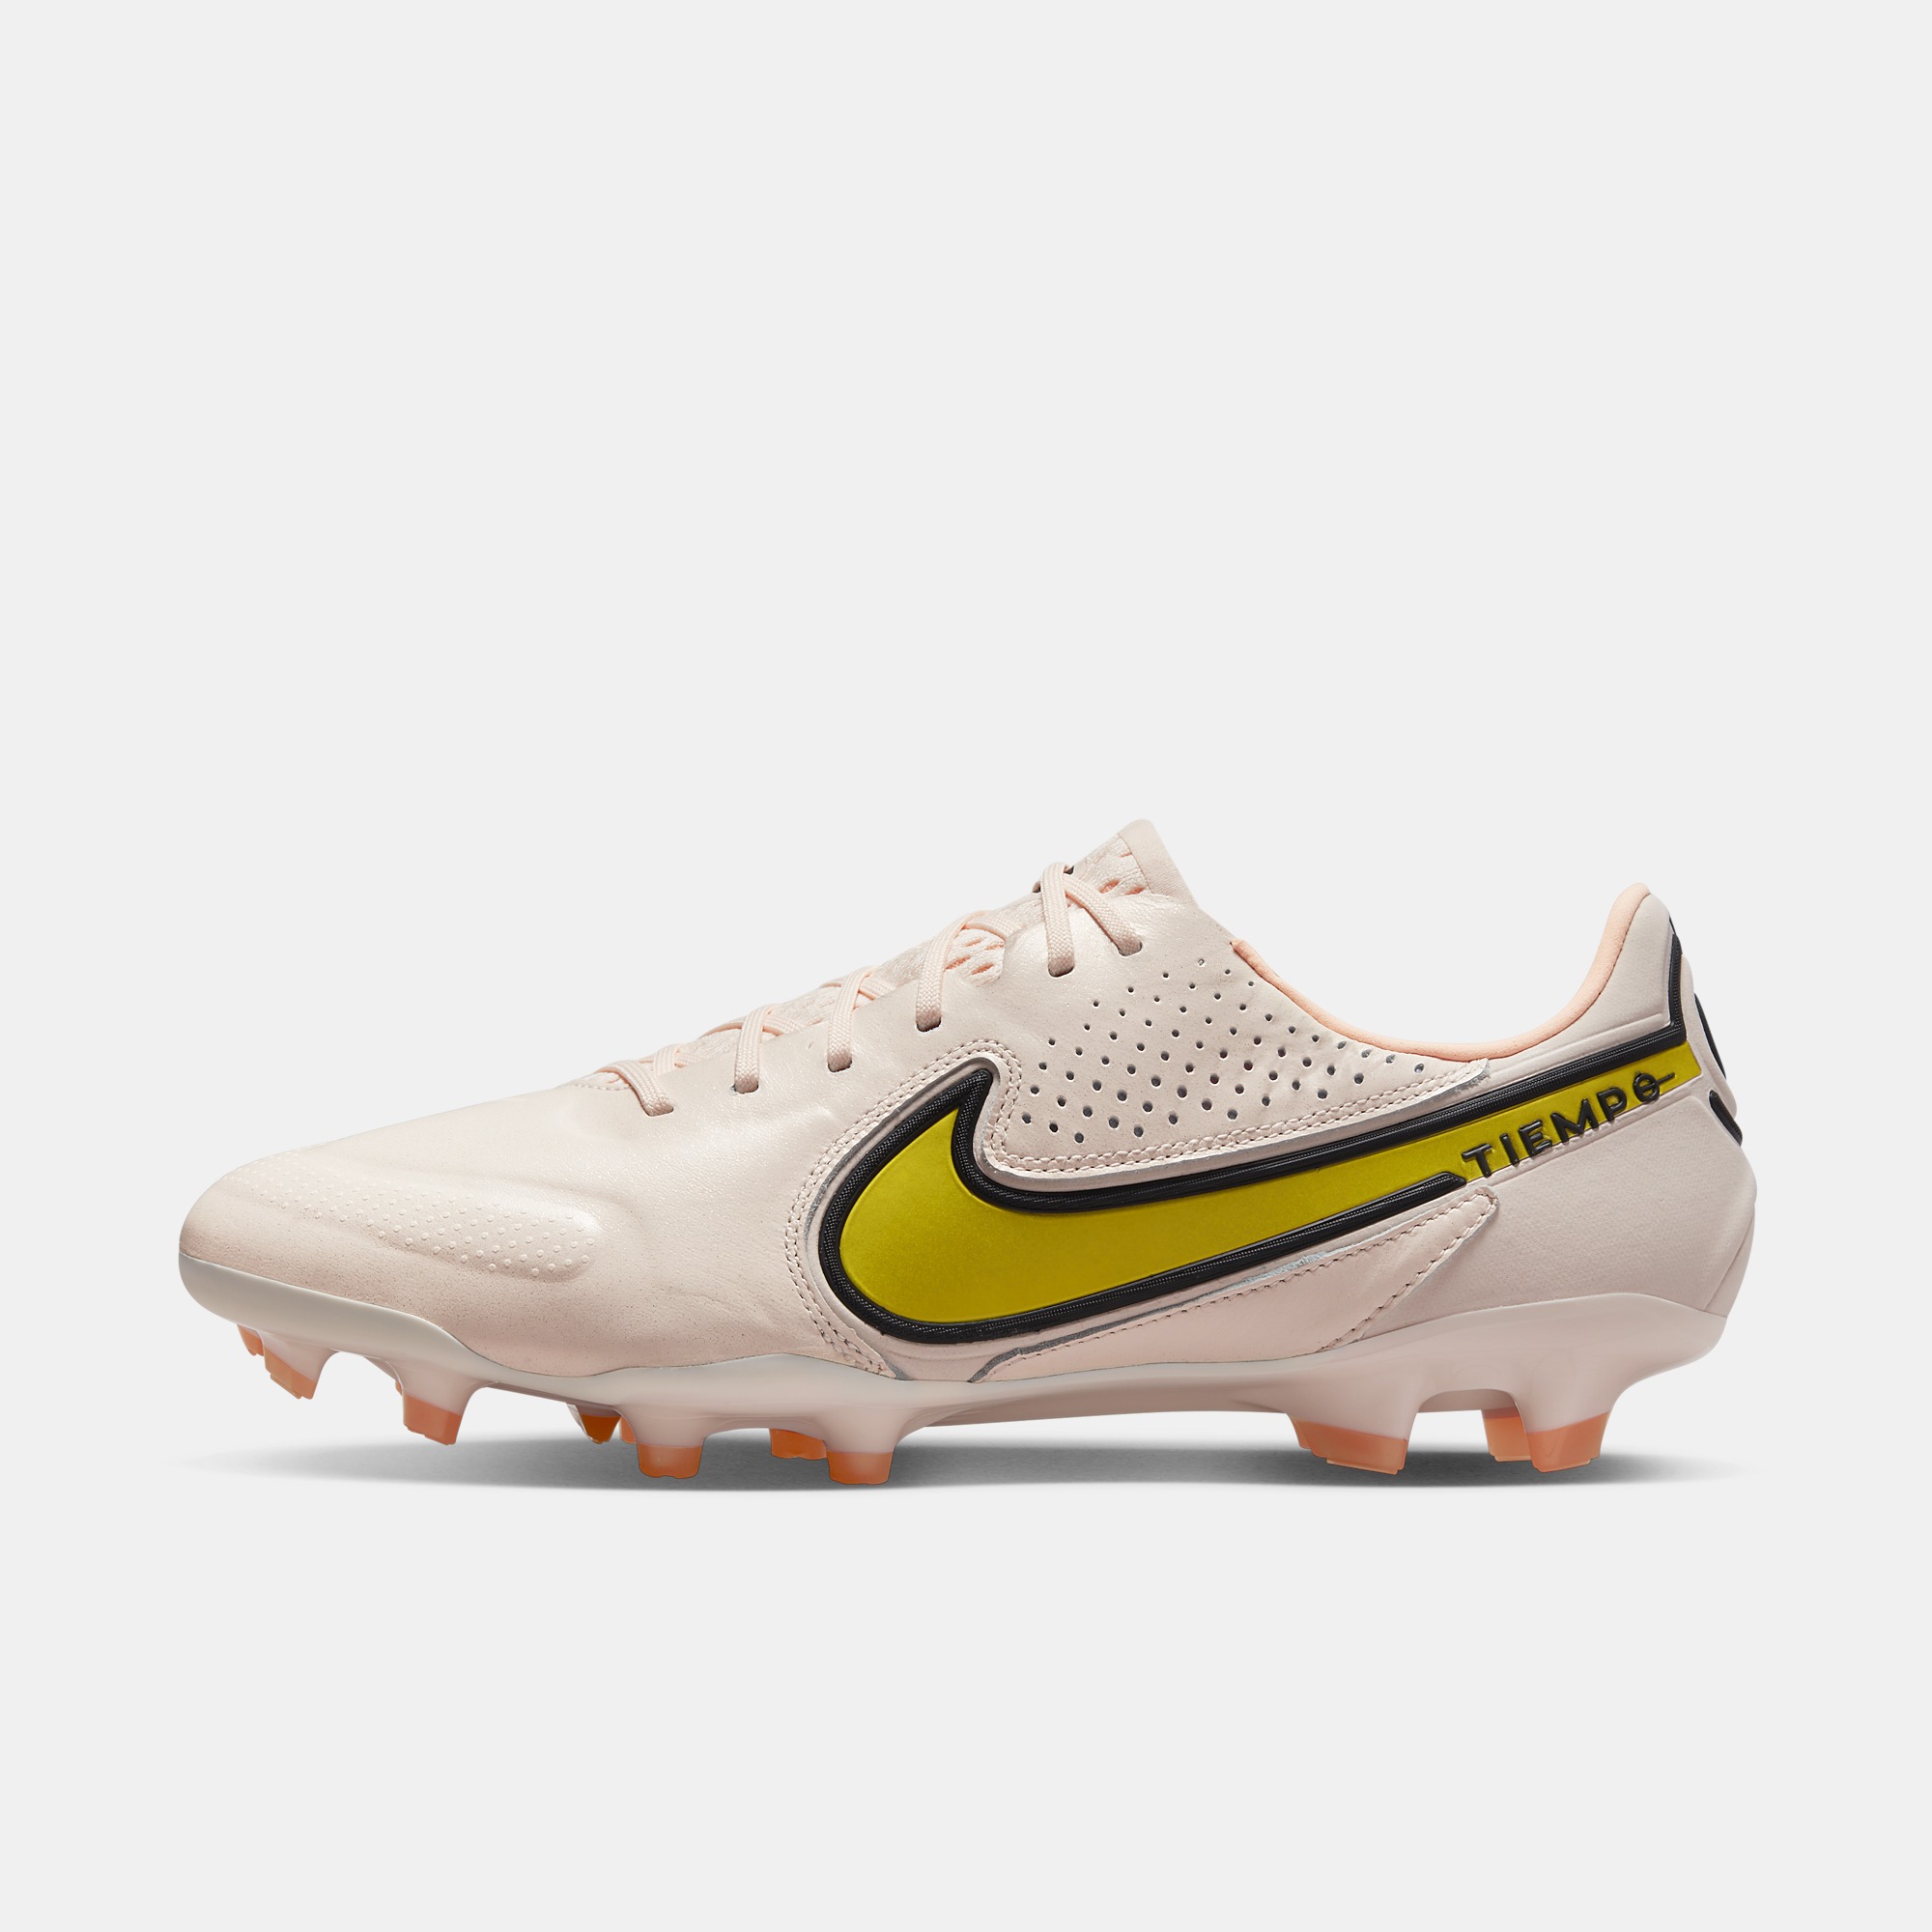 Og så videre Perfervid anbefale stefanssoccer.com:Nike Tiempo Legend 9 Elite Firm Ground Soccer Cleats -  Guava Ice / Sunset Glow / Yellow Strike